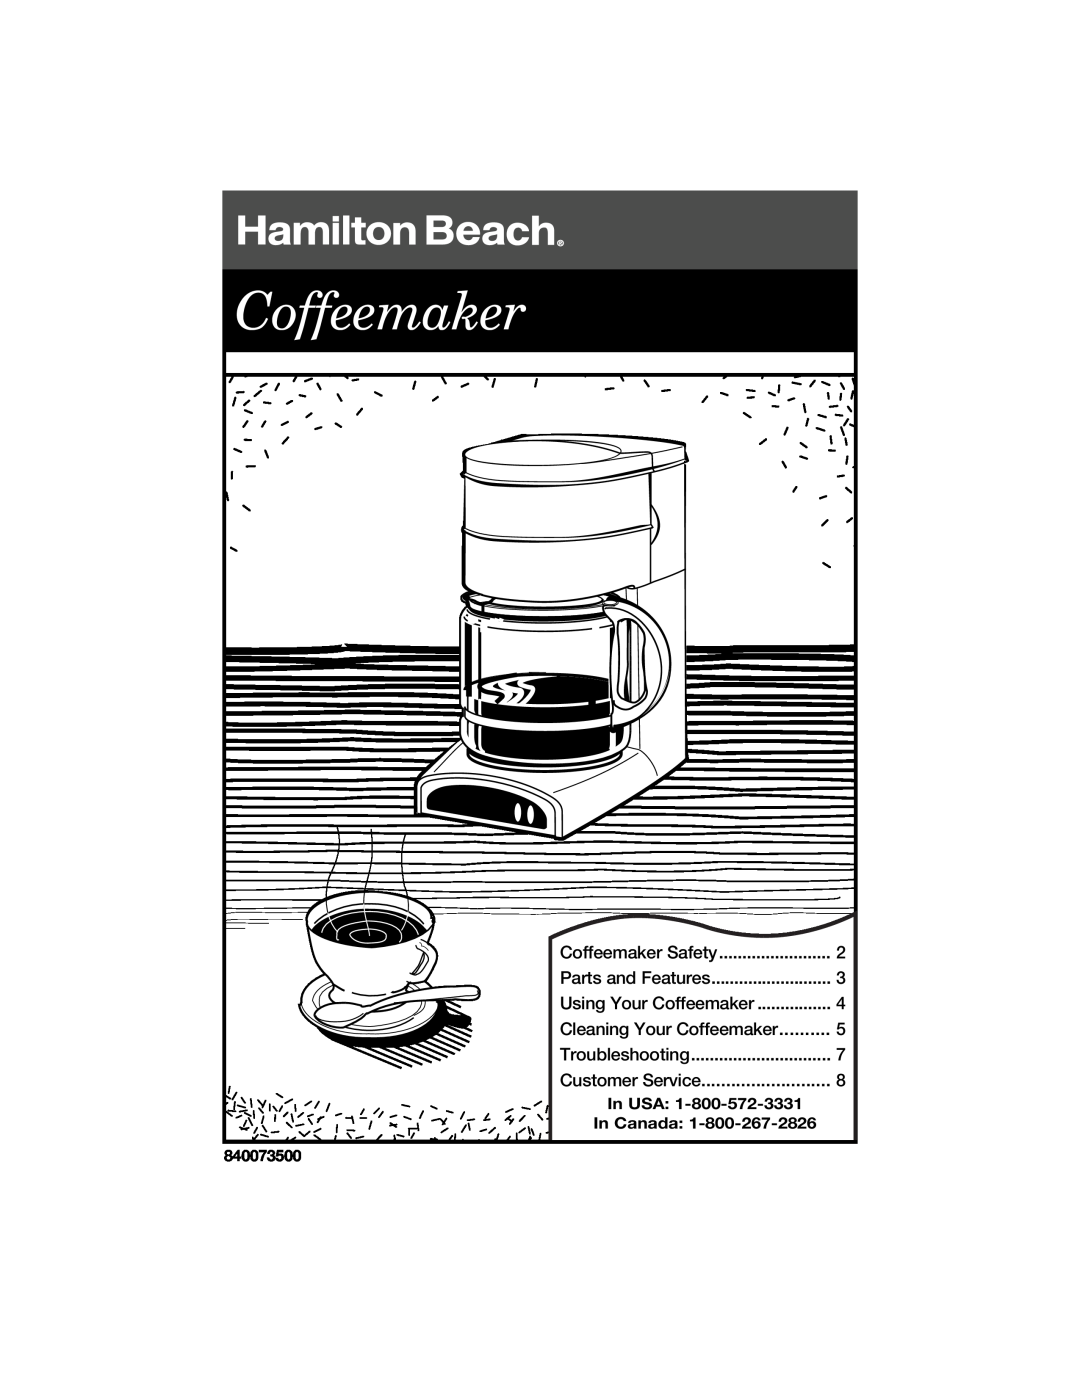 Hamilton Beach 840073500 manual Coffeemaker Safety, Parts and Features, Using Your Coffeemaker, Troubleshooting 